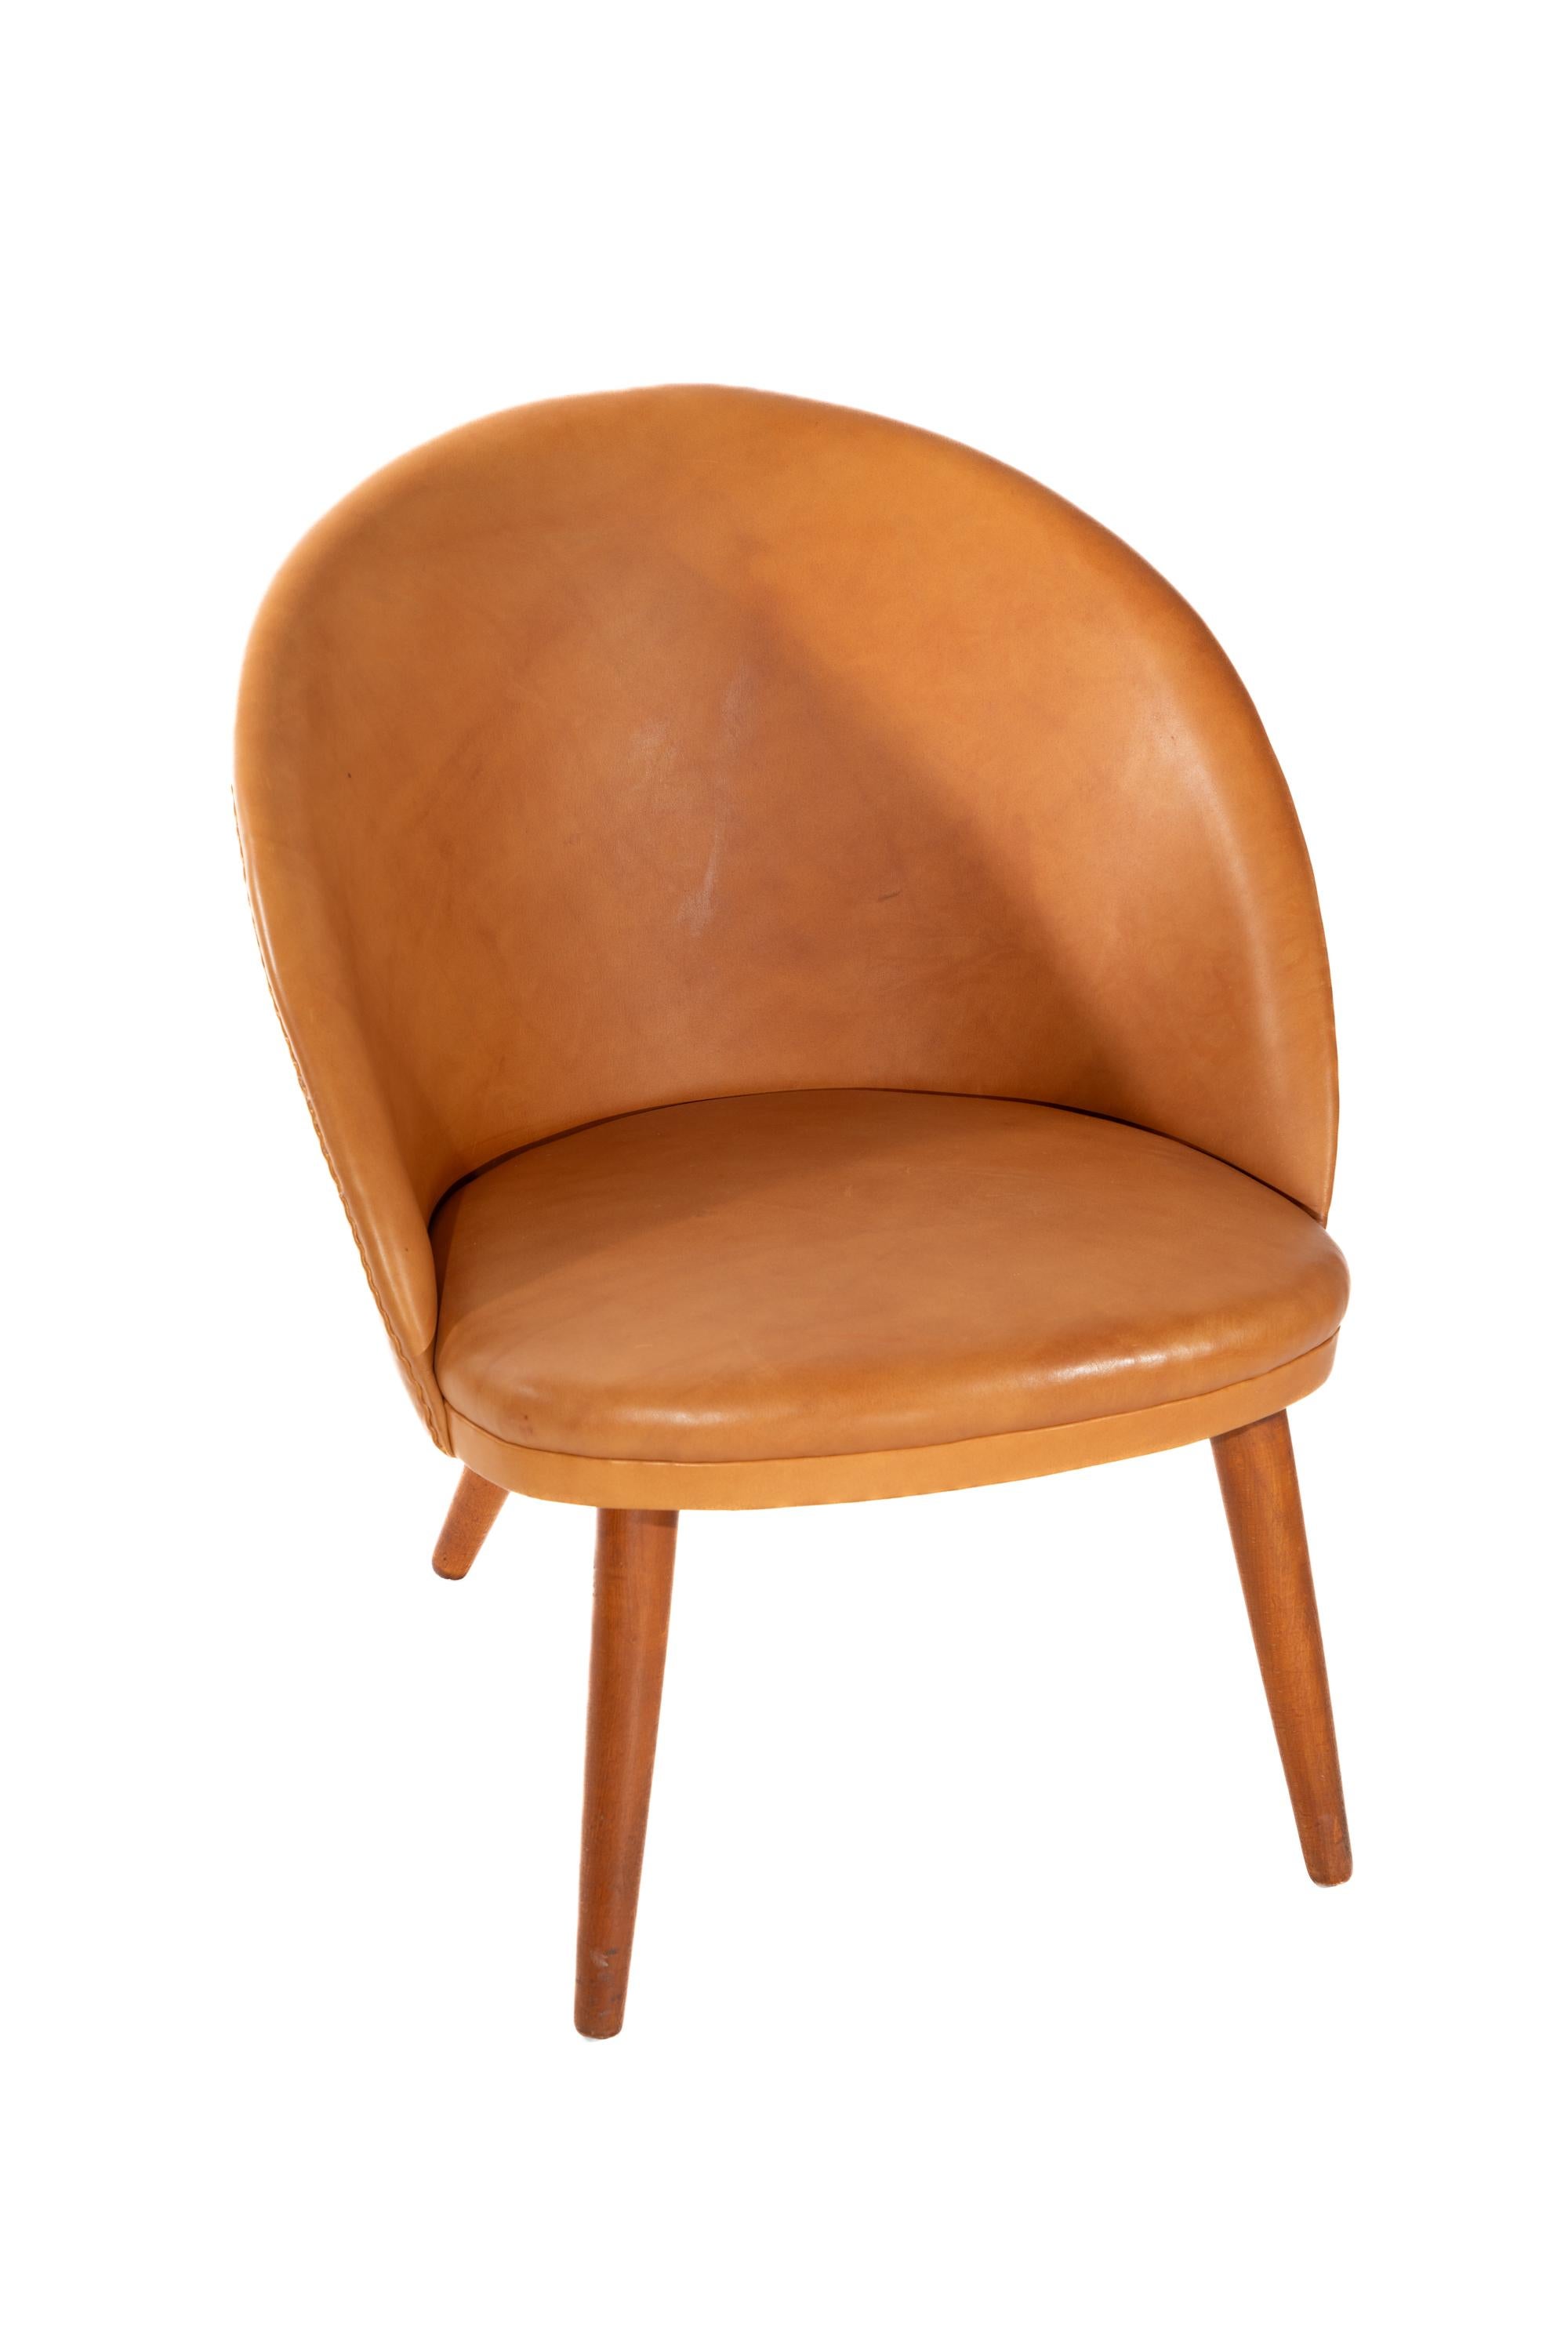 Mid-Century Modern Pair of Ejvind Johansson, Model 301 Lounge Chairs For Sale